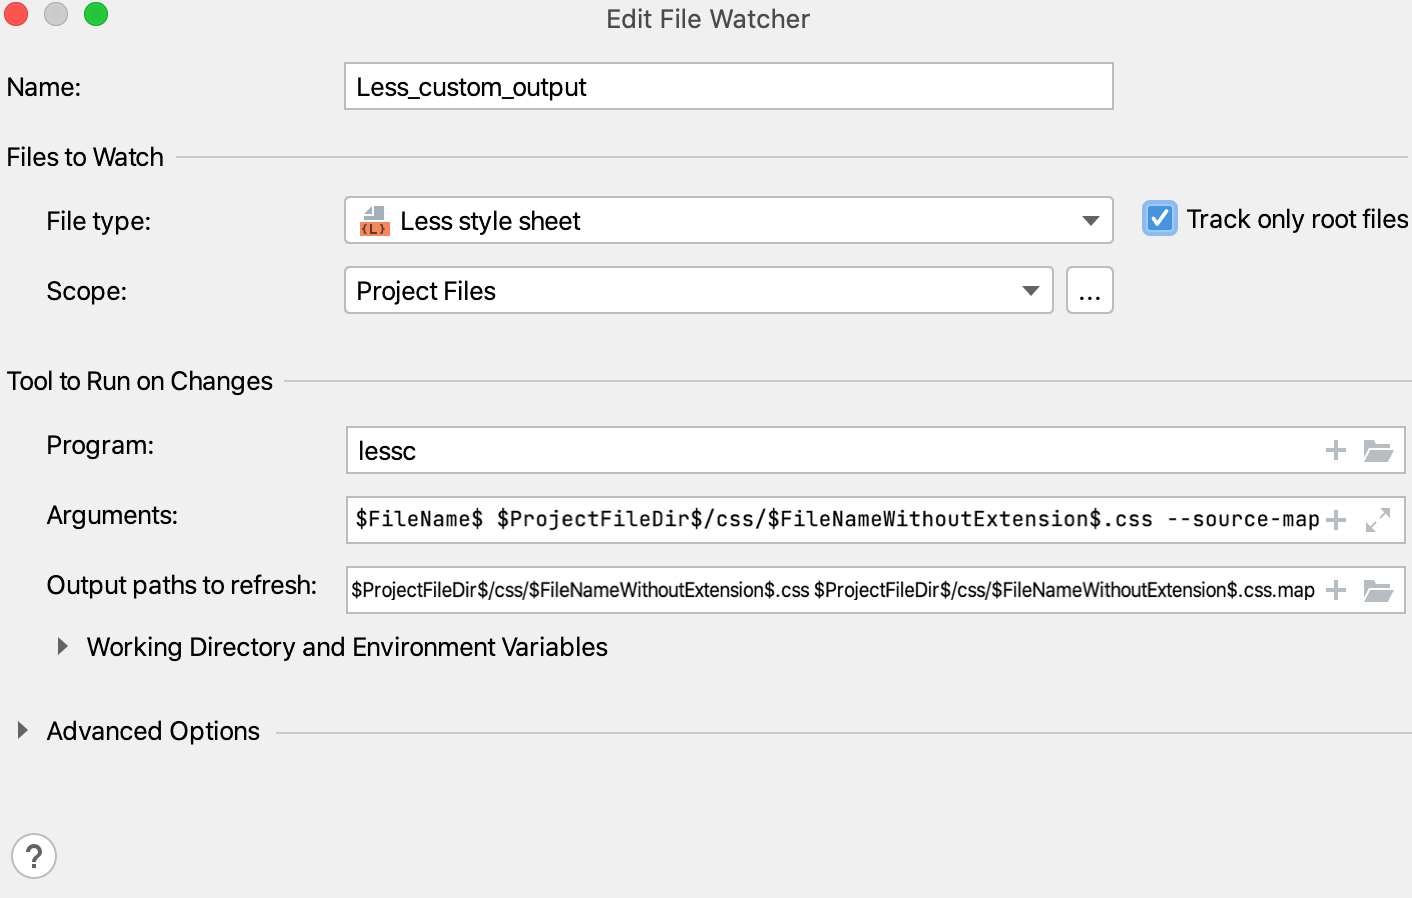 New File Watcher with custom output path